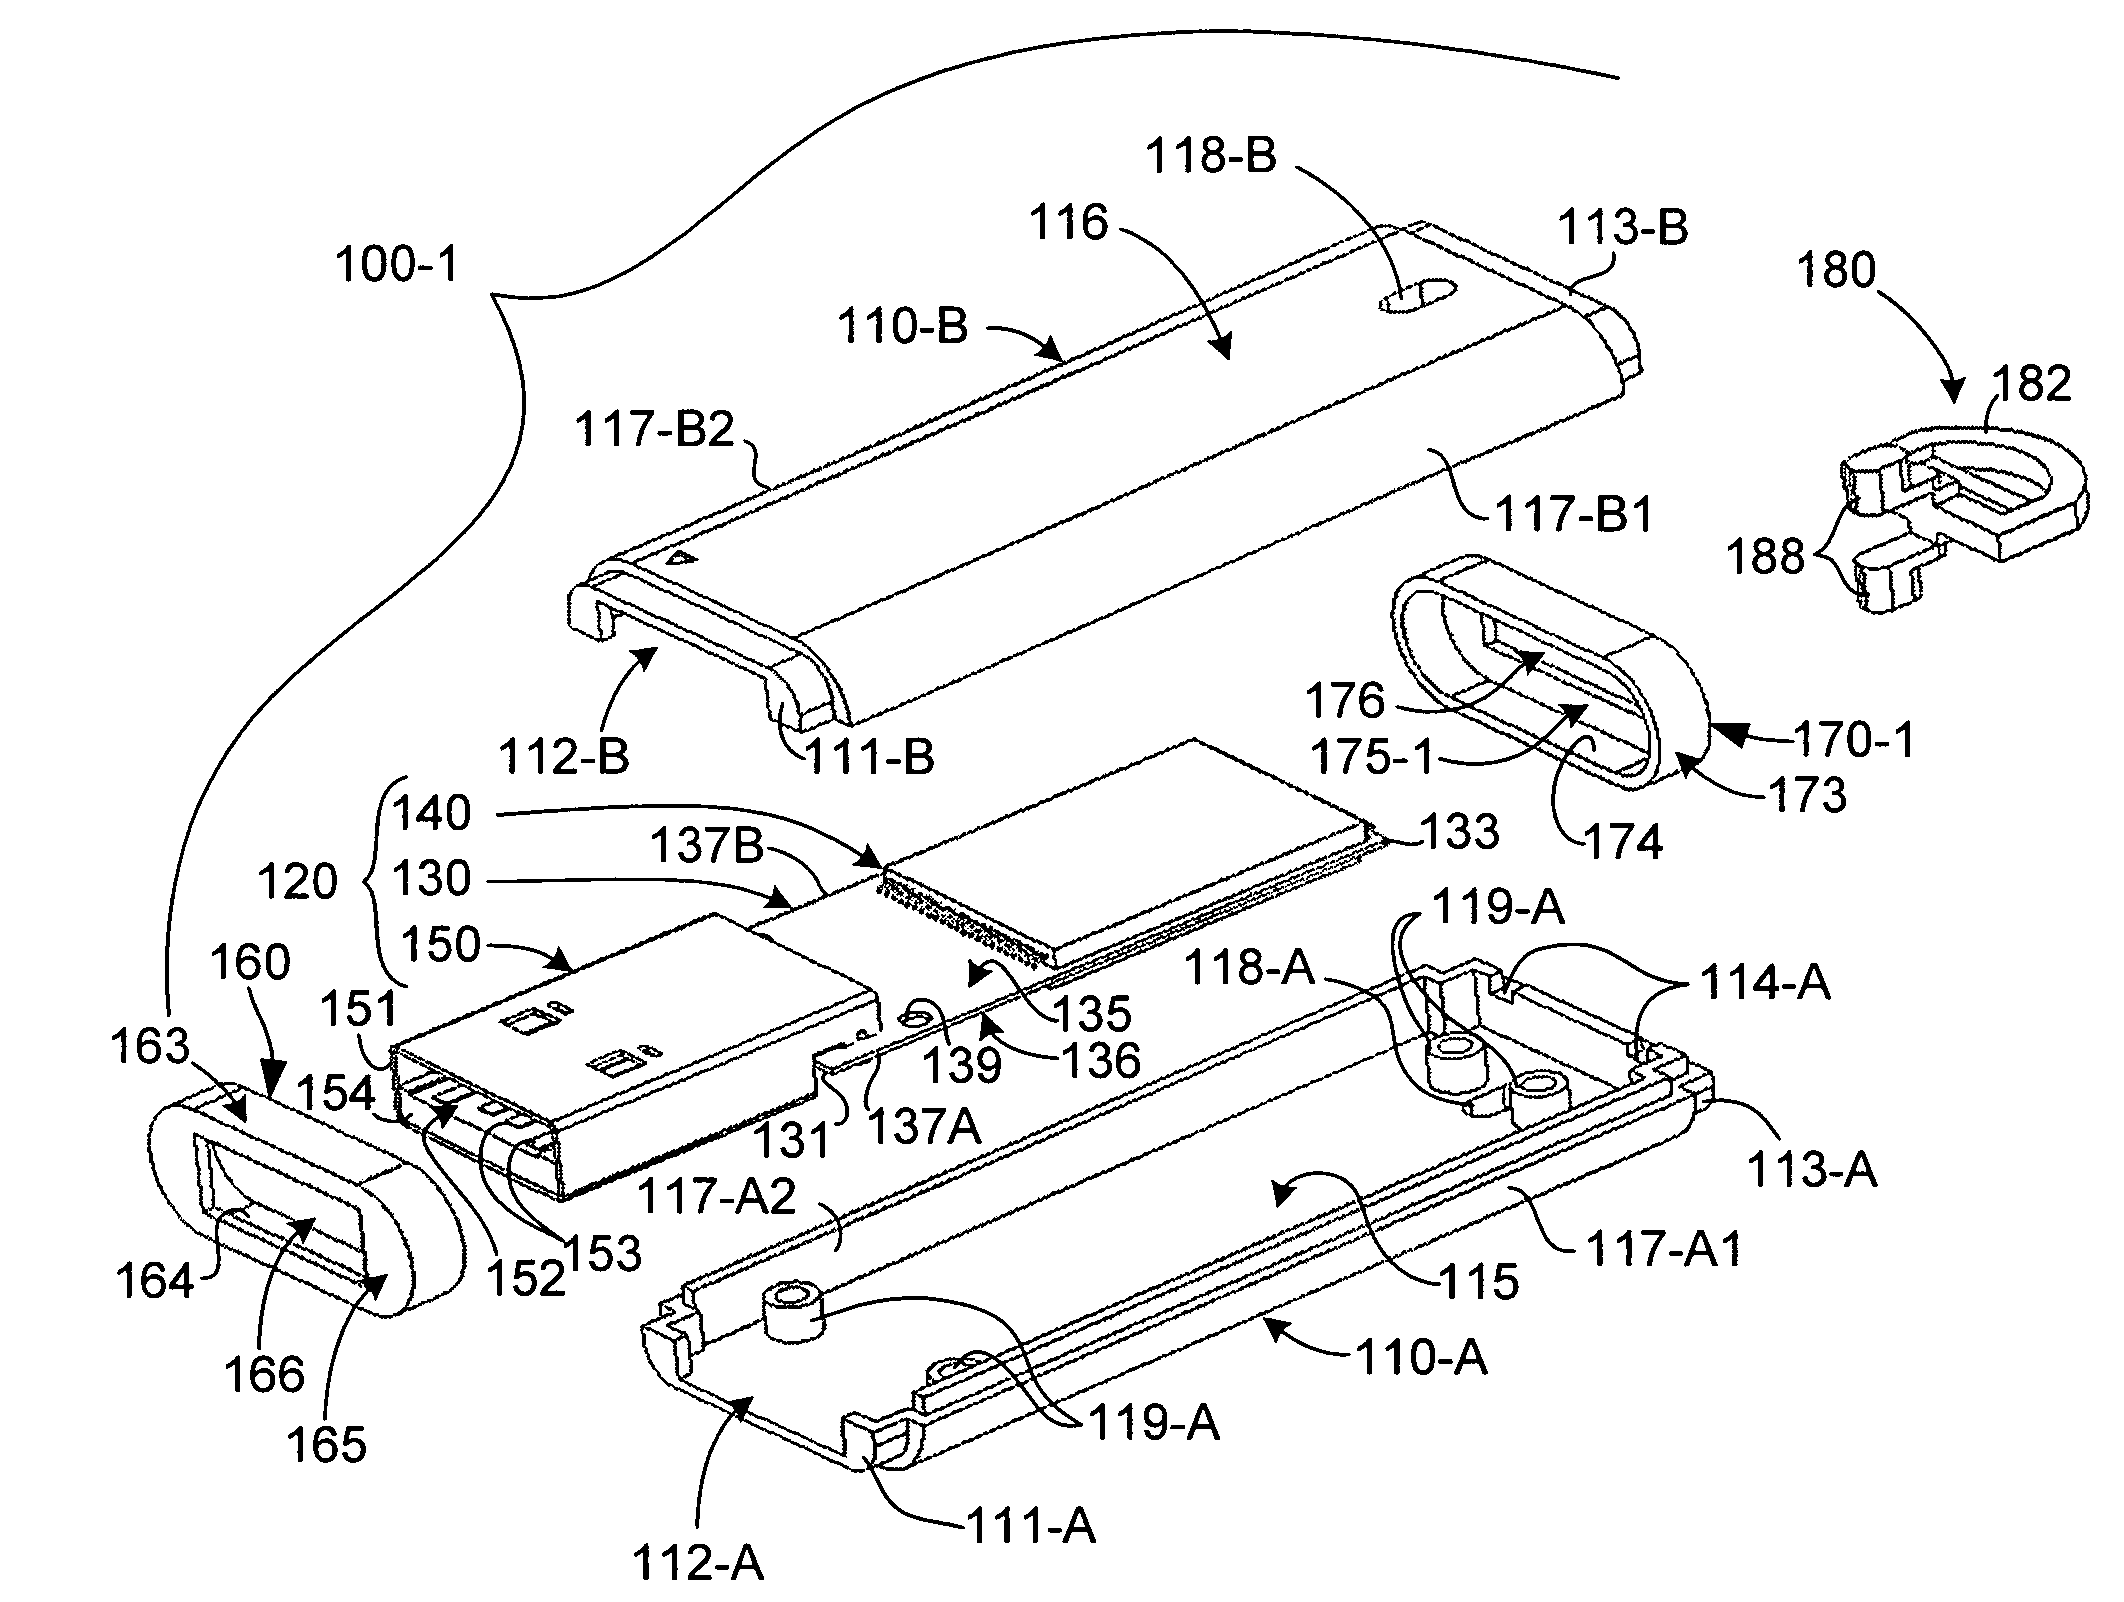 Portable computer peripheral apparatus with reinforced connecting ring